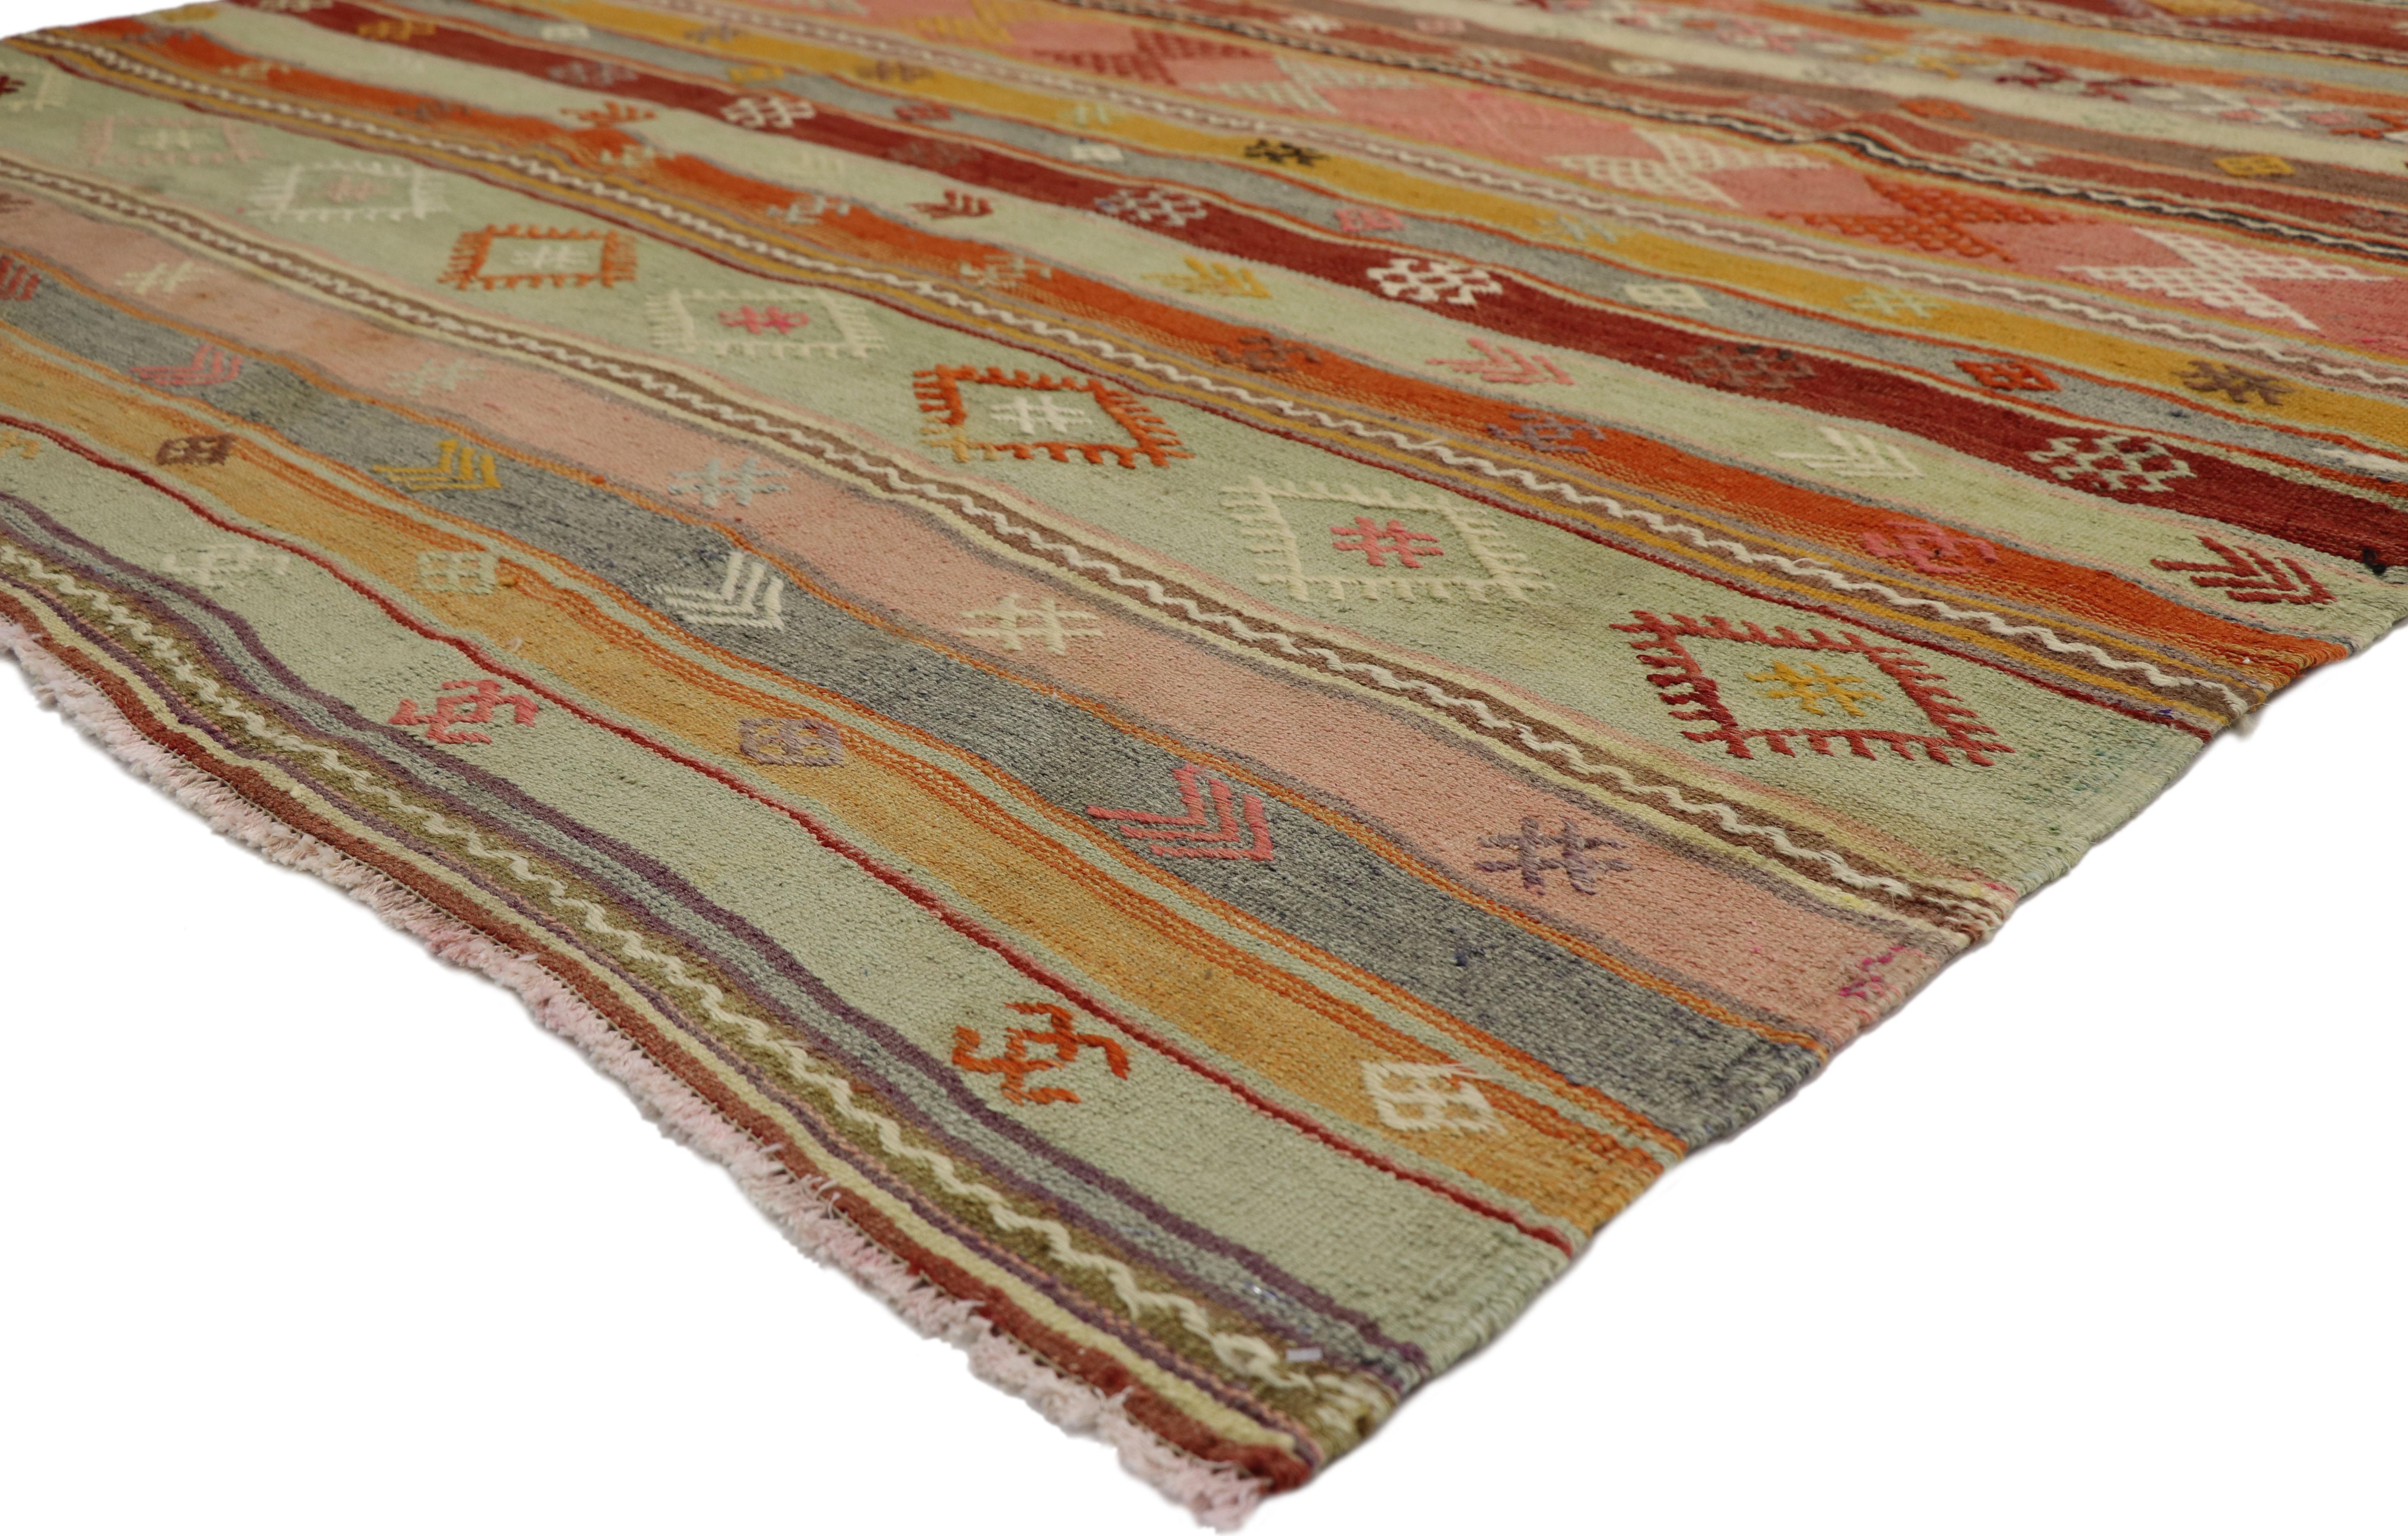 51237, vintage Turkish Striped Kilim rug with Bohemian Tribal style, flat-weave rug. This handwoven wool vintage Turkish striped Kilim rug features double colored bands in alternating colors dotted with a few symbolic Turkish motifs on a warm brown